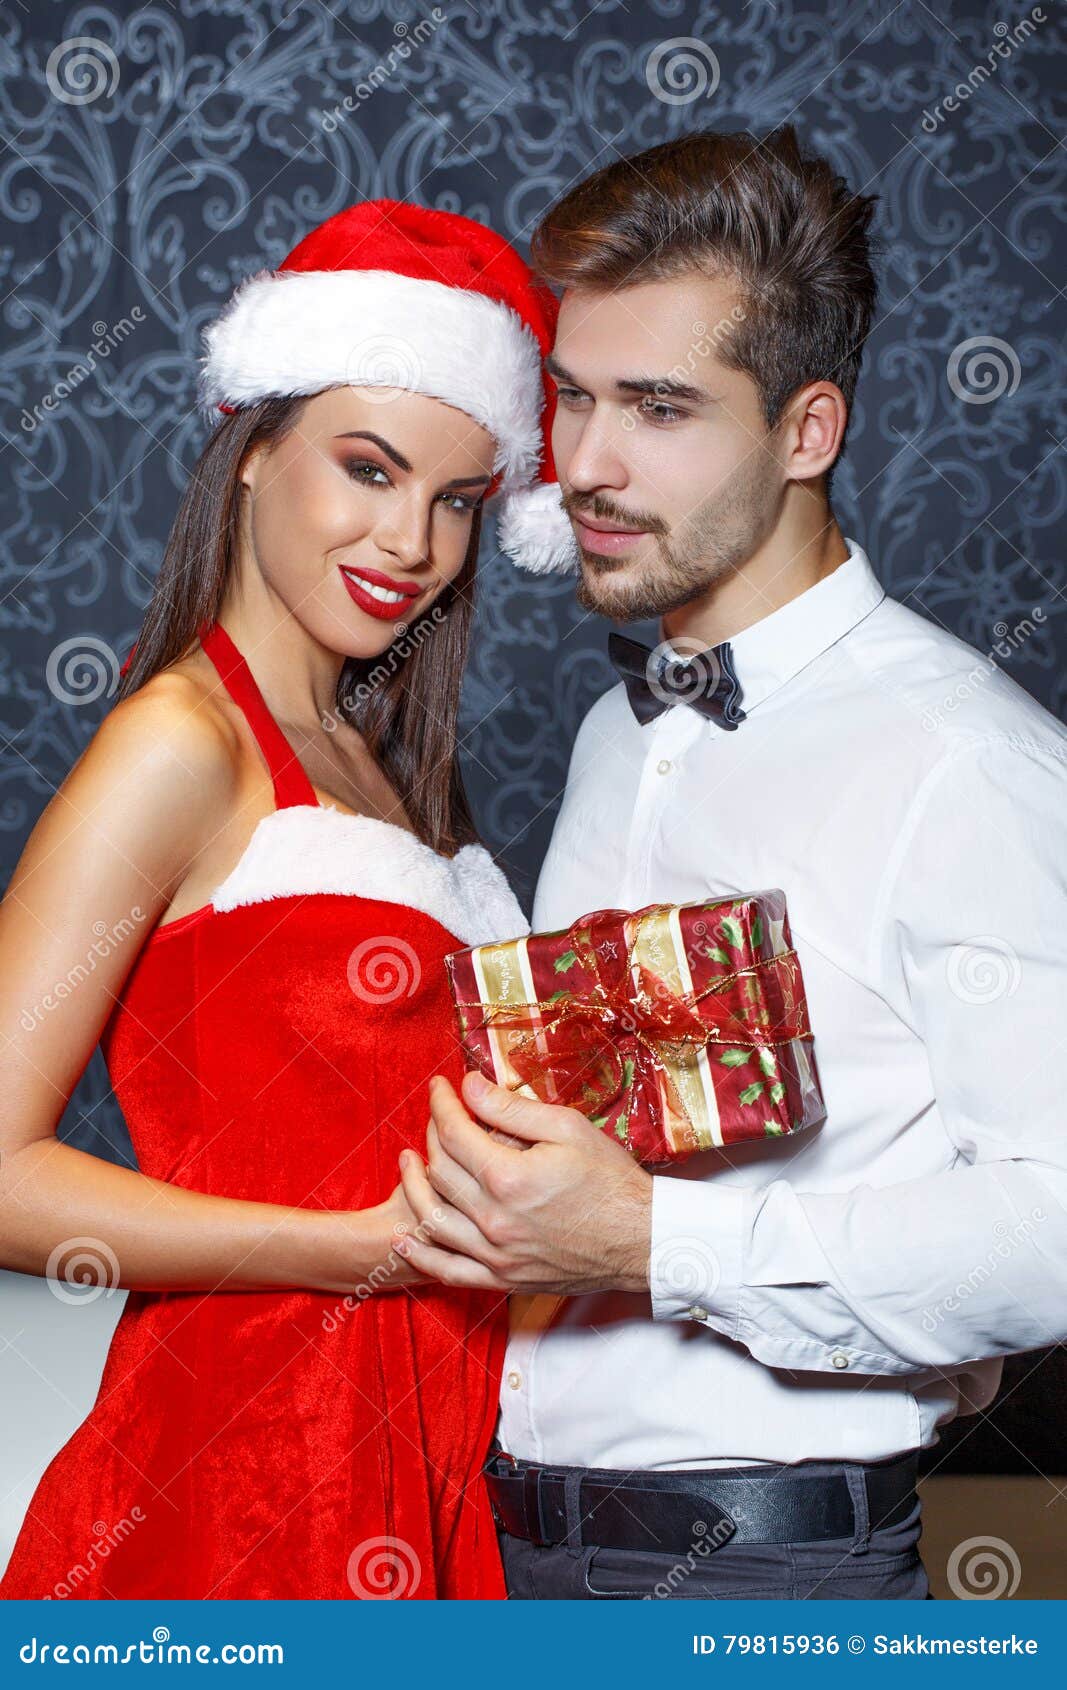 man in tux get christmas present from girlfriend